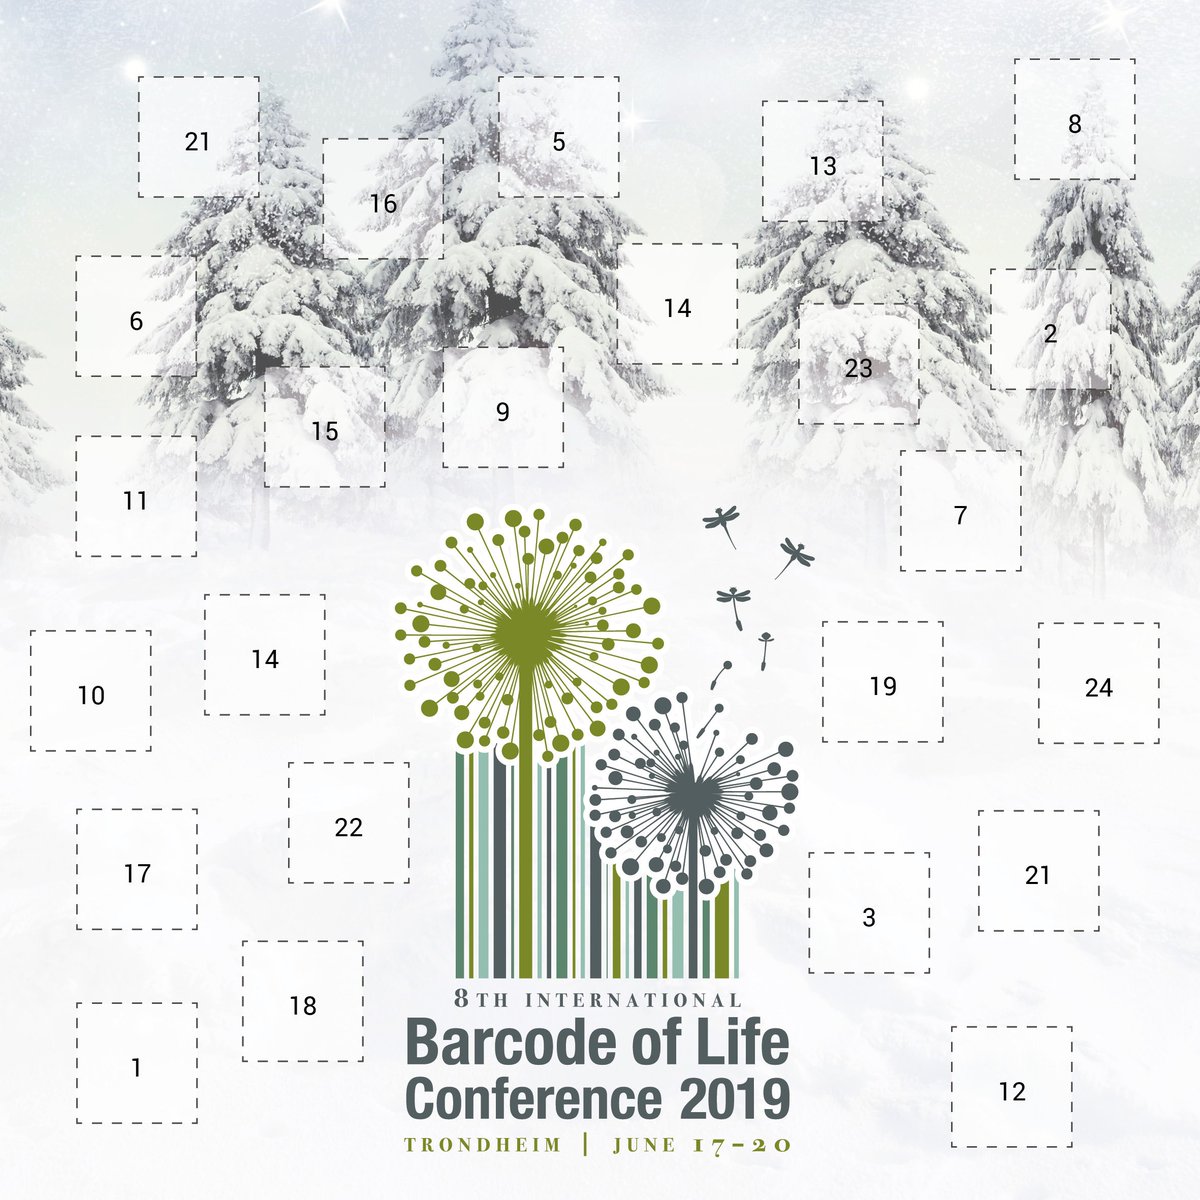 Only three more days until we open door #1 in our #iBOL2019 #AdventCalendar . Follow @norwbol to receive news and facts from the iBOL Conference. @iBOLproject @DNAdiversity @DNABarcodes @UNBiodiversity